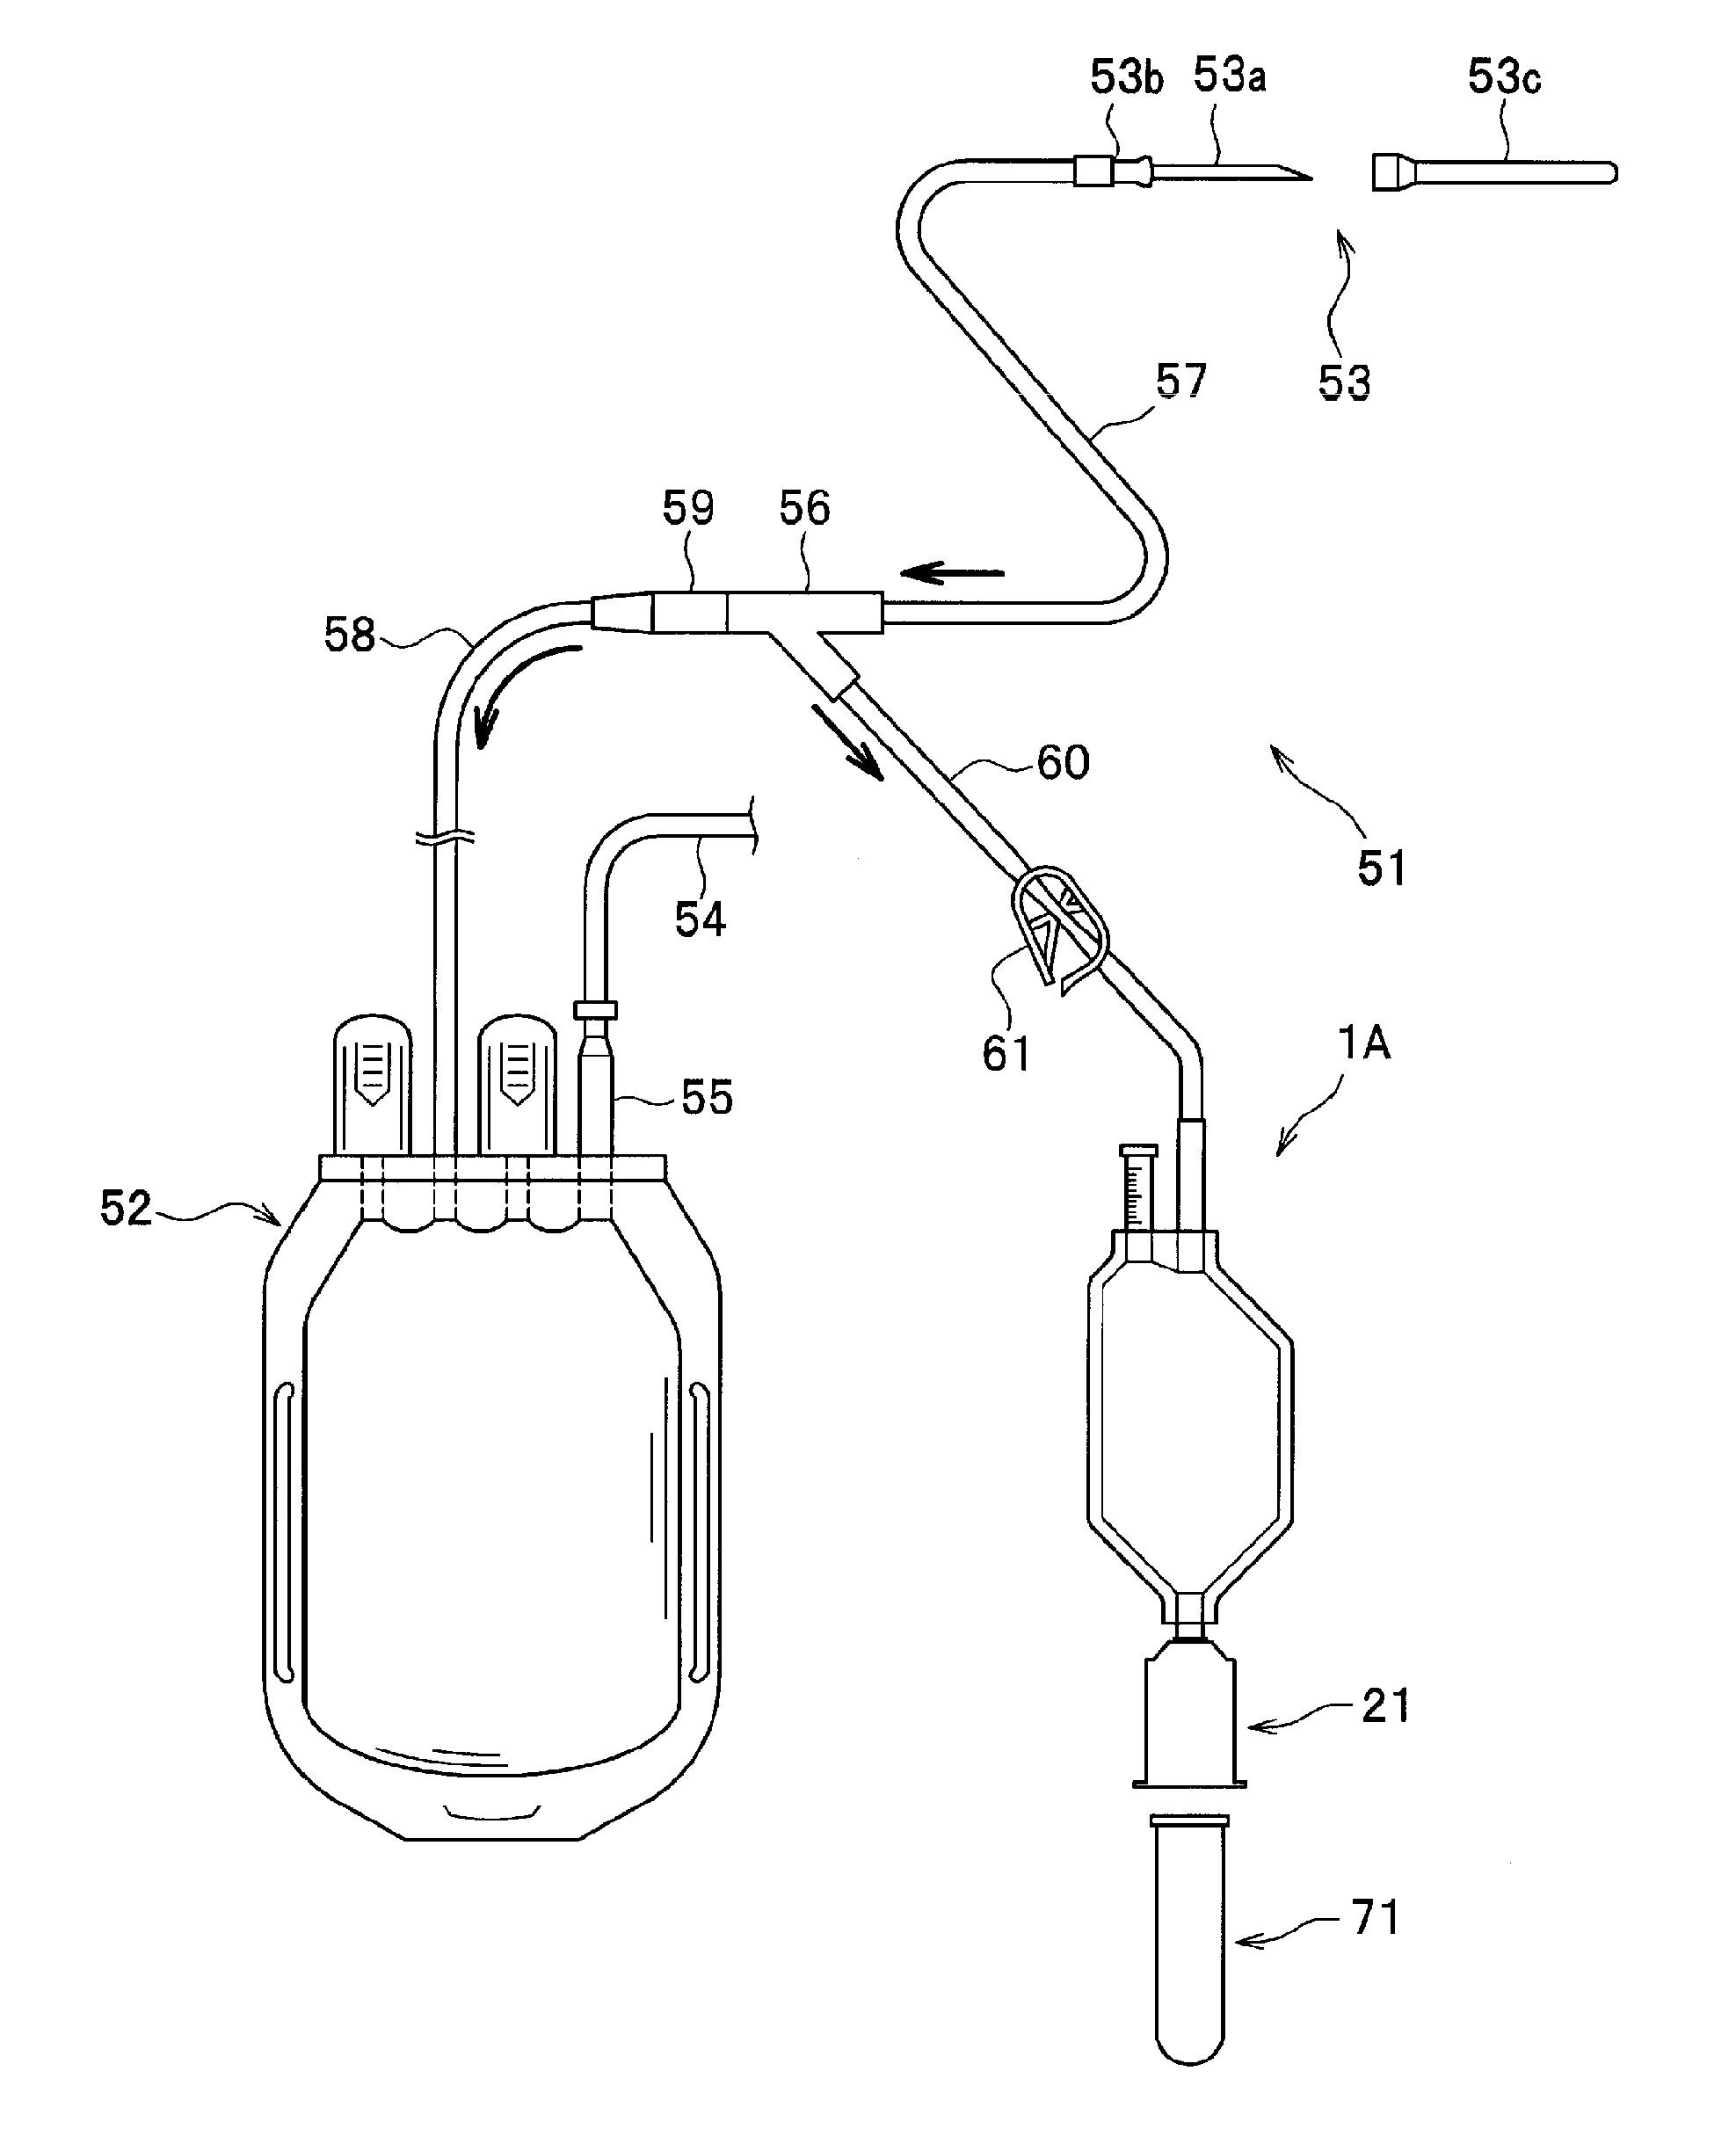 Blood sample container and blood collecting instrument